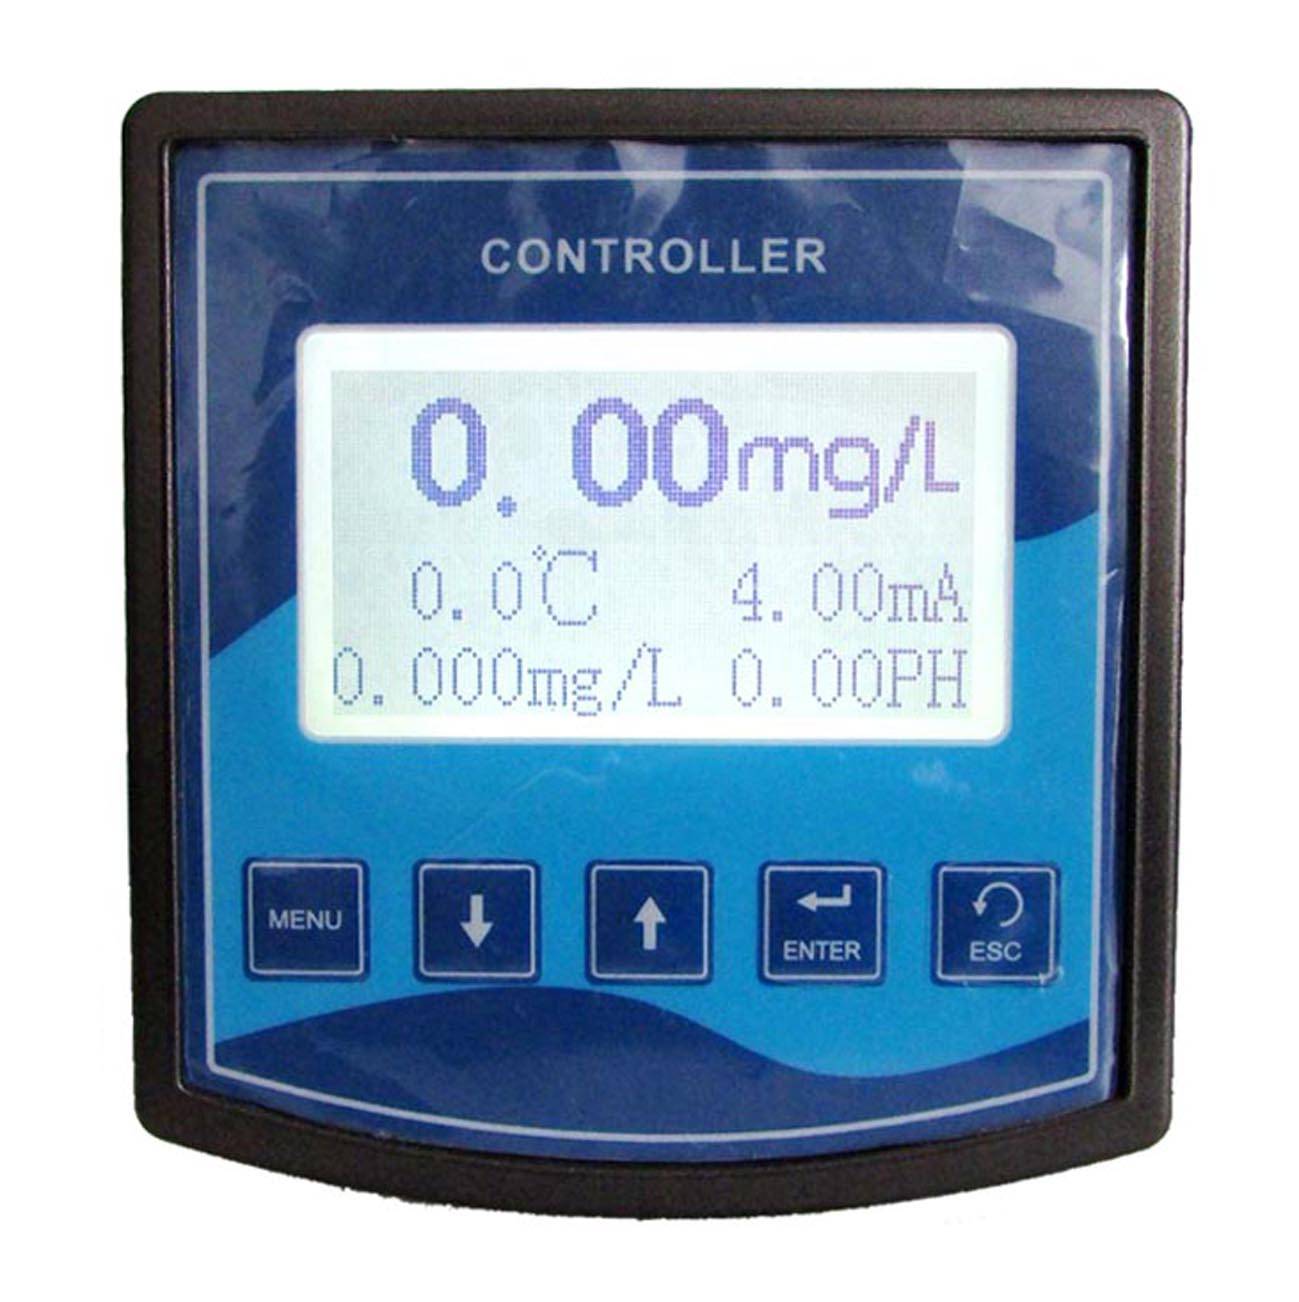 Online-Free-Residual-Chlorine-pH-Hocl-Orp-Ec-TDS-Do-RO-Controller-for-Dpd-Ppm-Water-Treatment-IP65-CL-6850- 拷贝